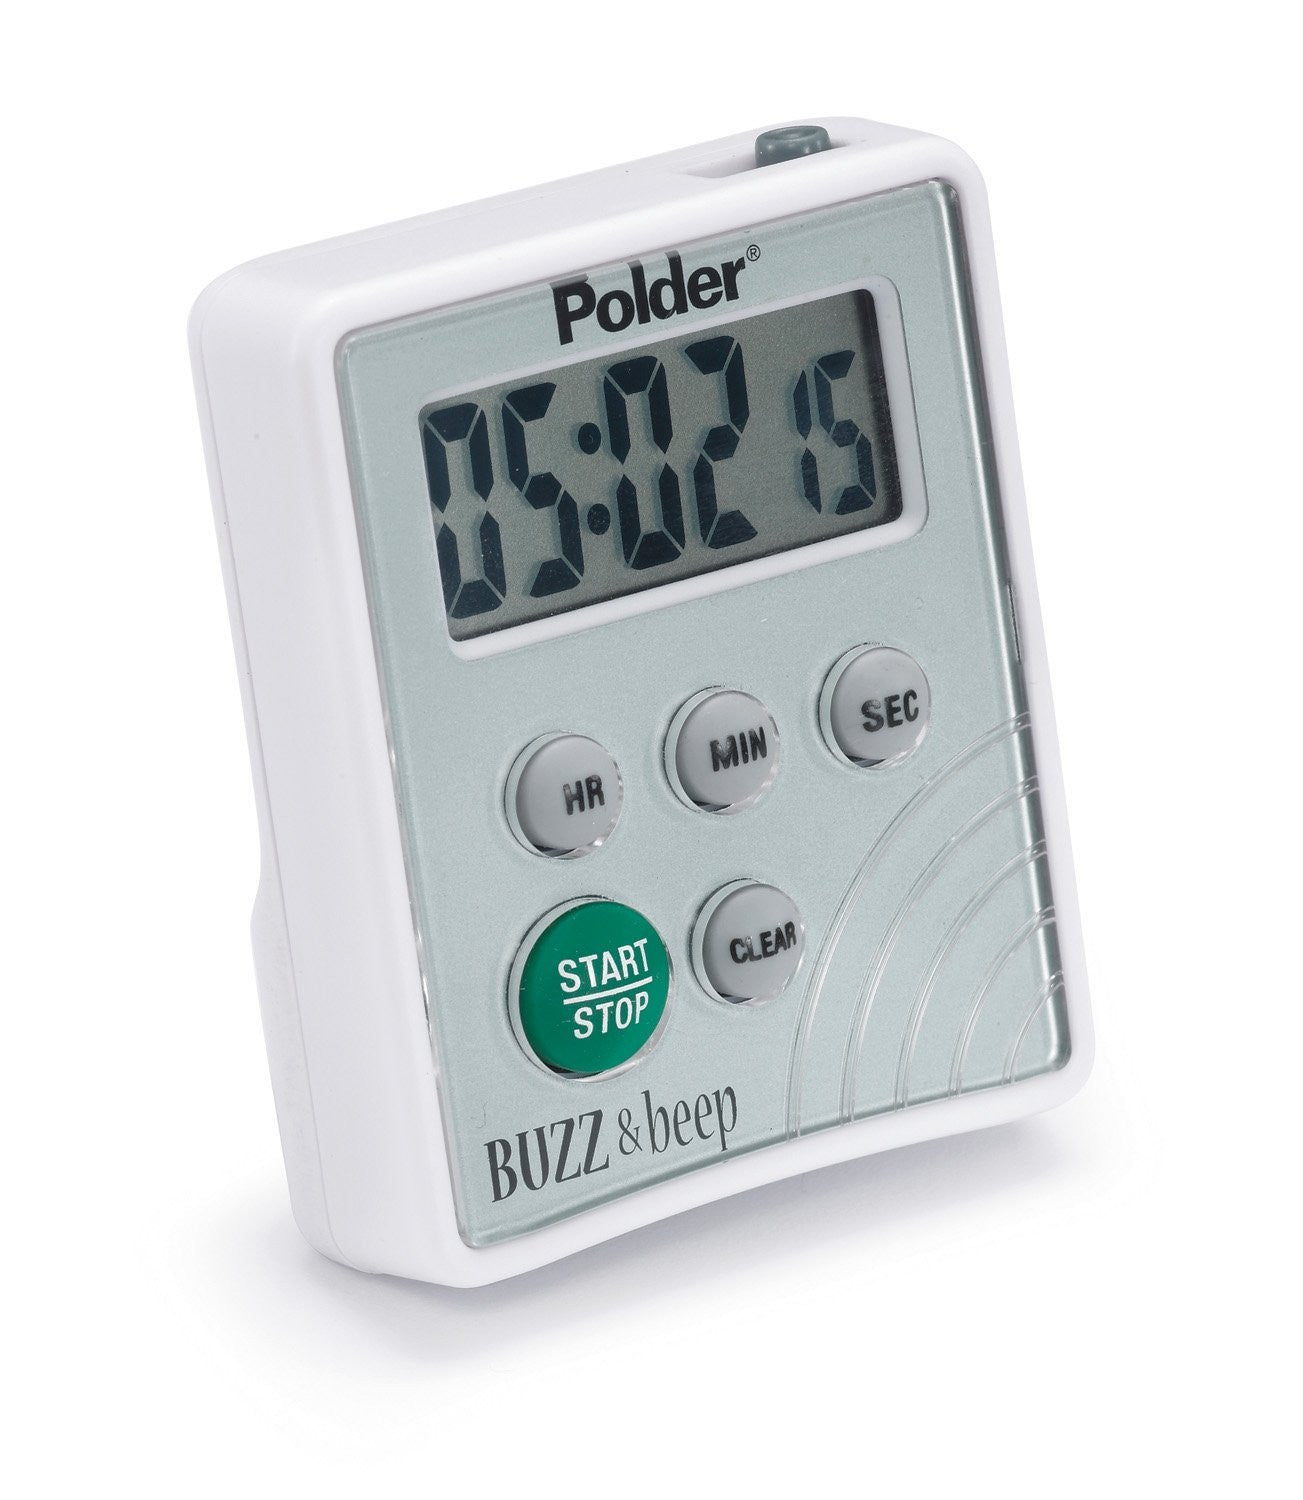 A timer that buzzes and beeps. It has 5 buttons and an LED screen for display